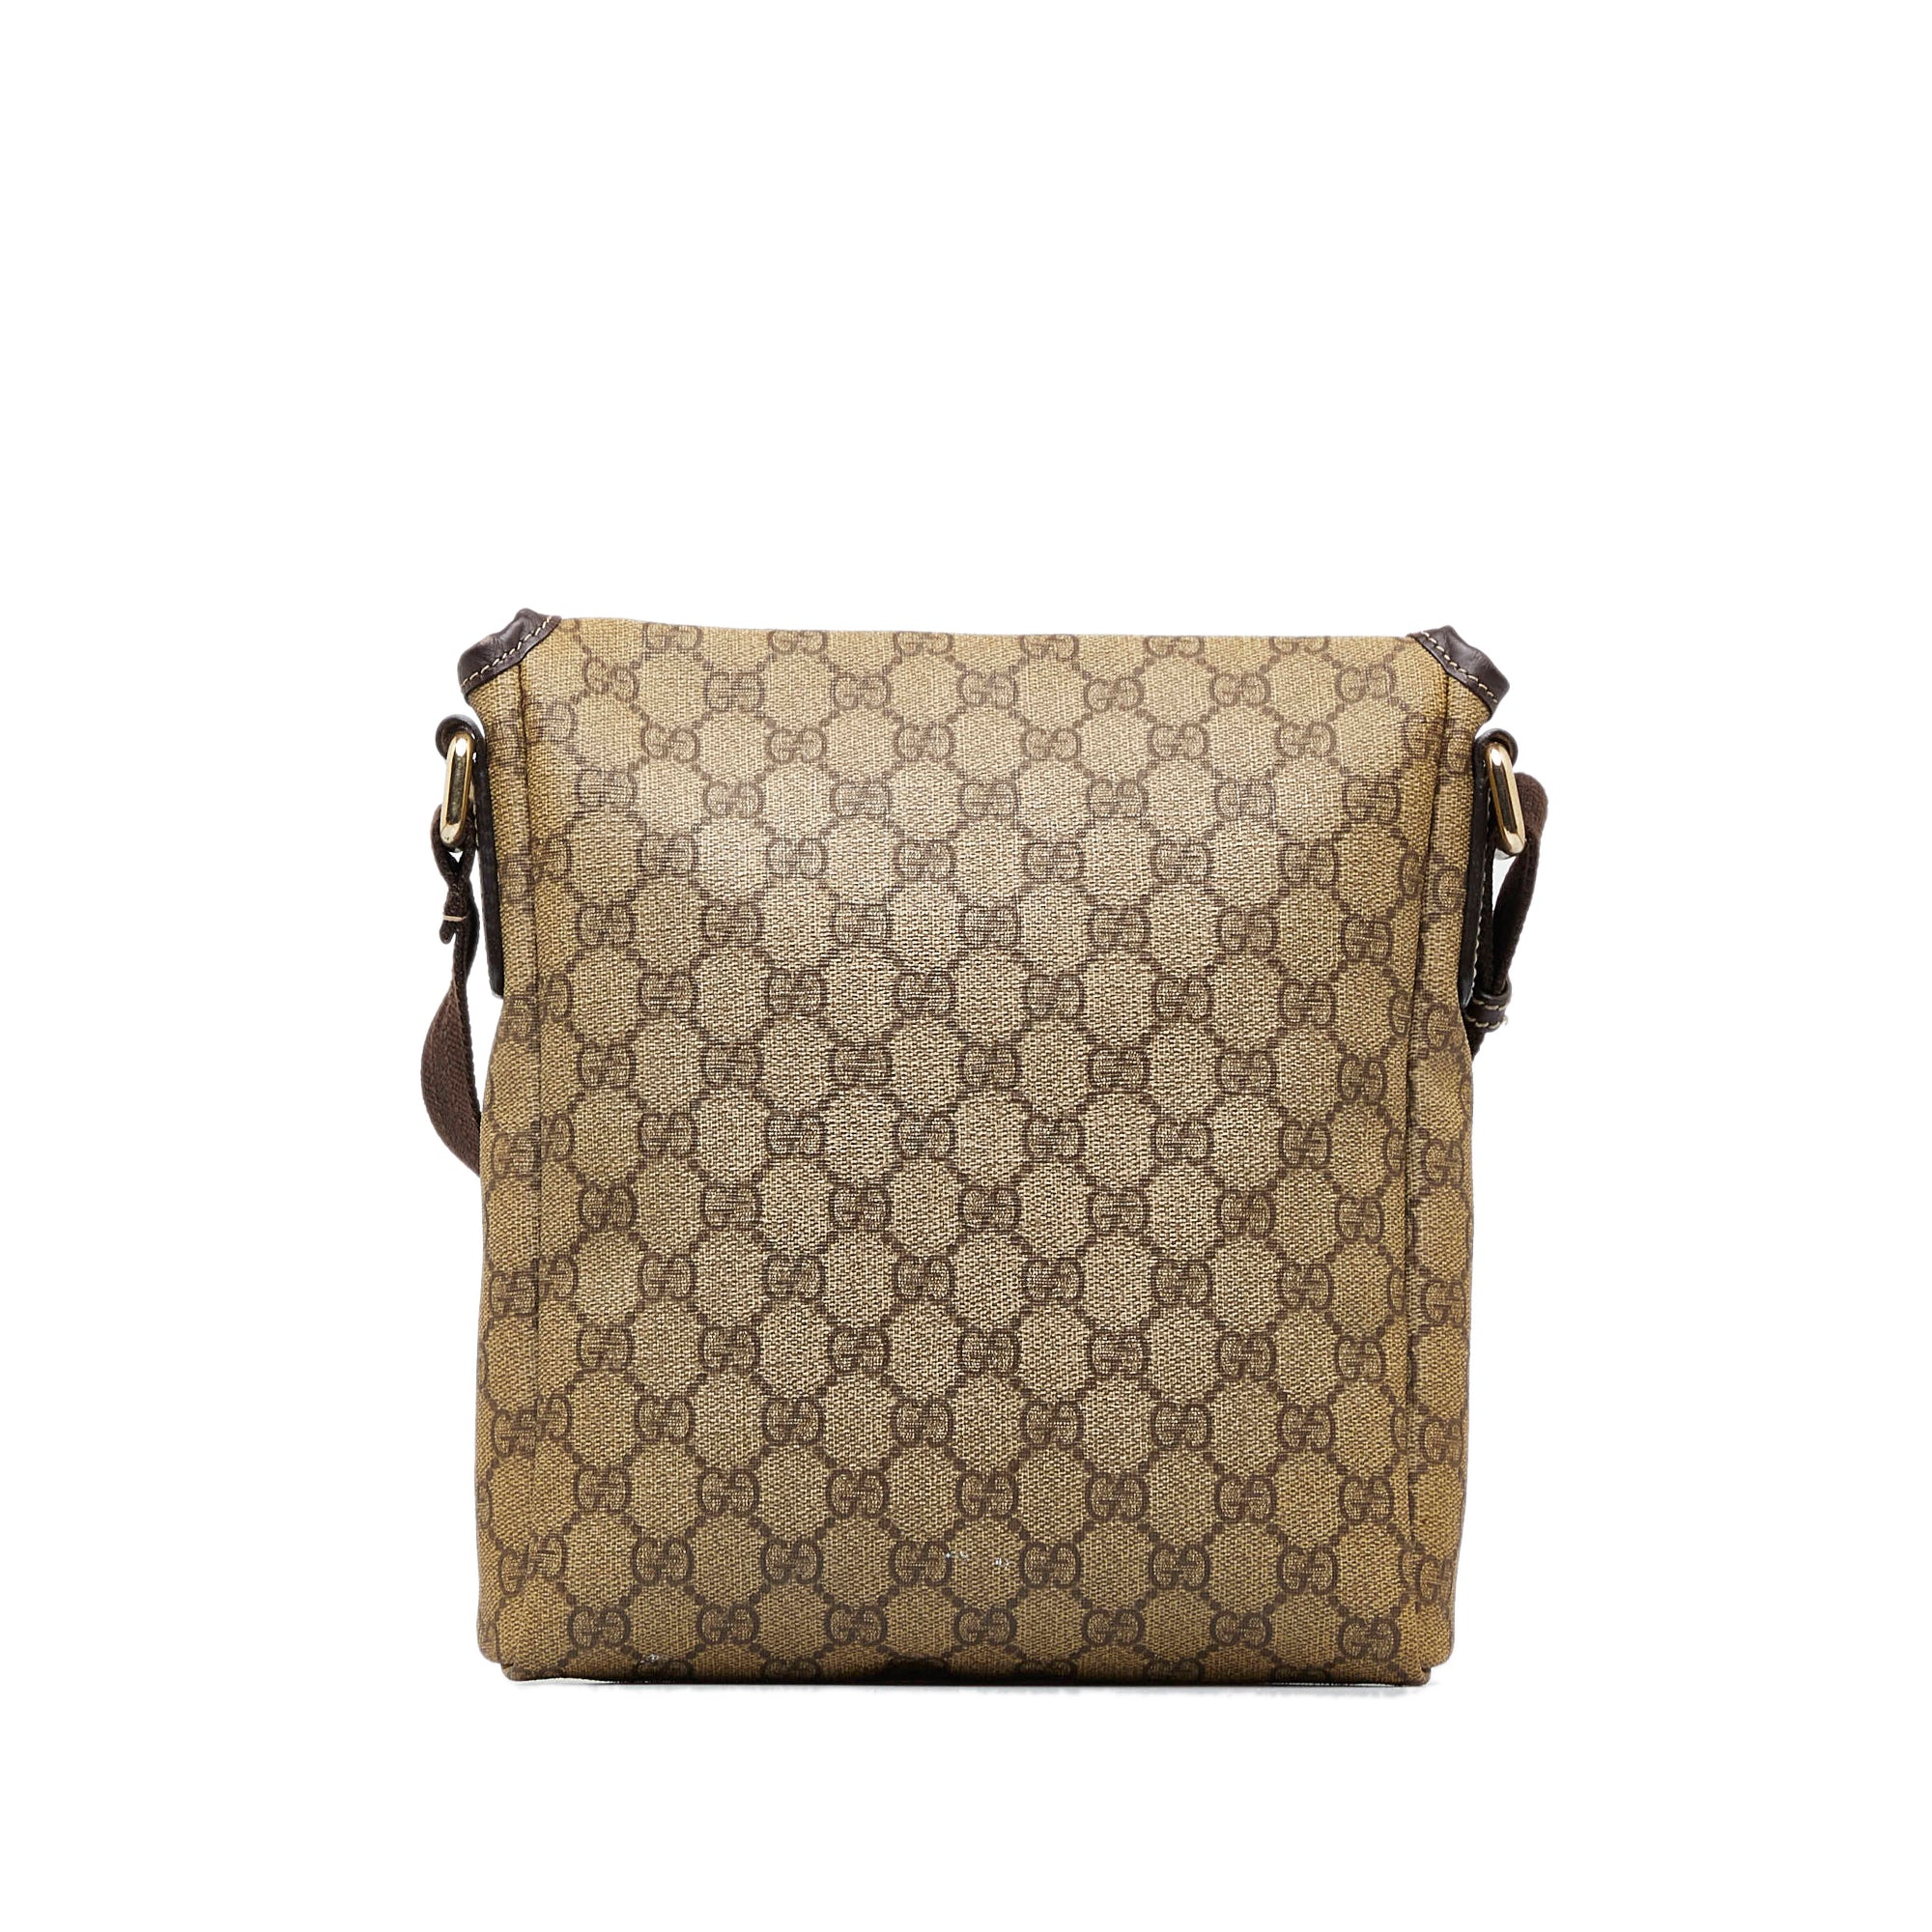 Gucci Beige/Brown GG Supreme Canvas and Leather Crossbody Bag Gucci